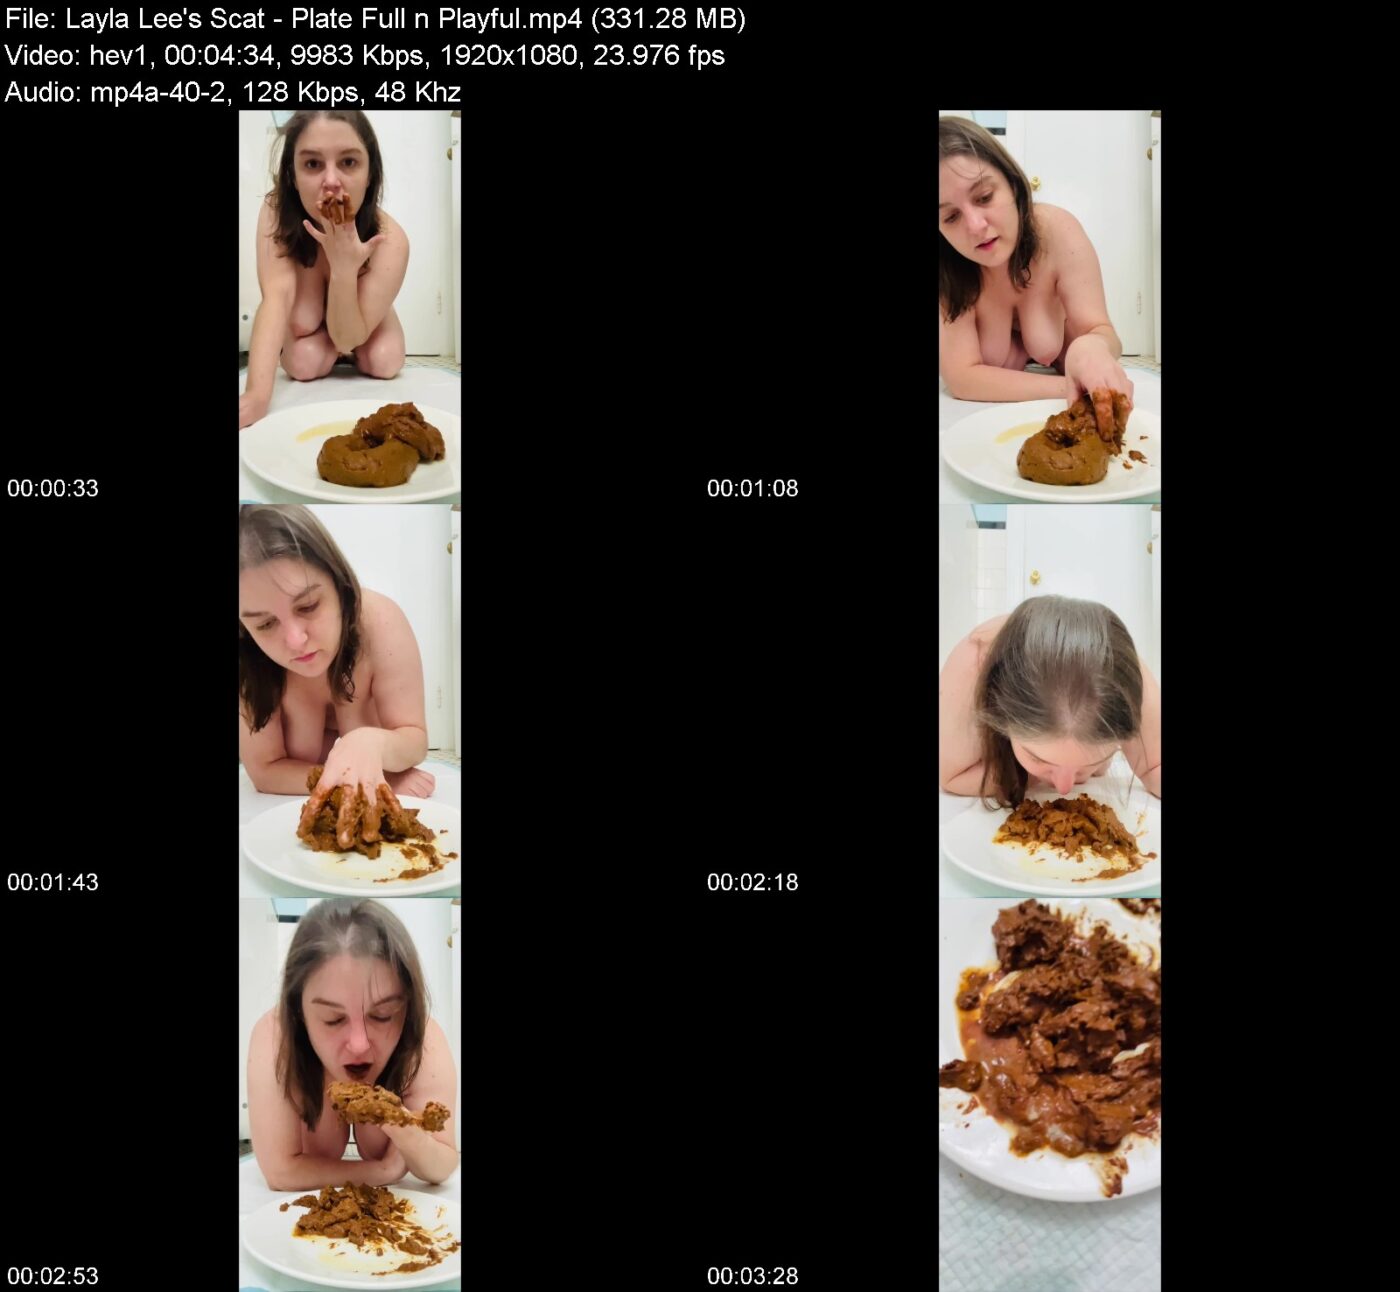 Actress: Layla Lee’s Scat. Title and Studio: Plate Full n Playful